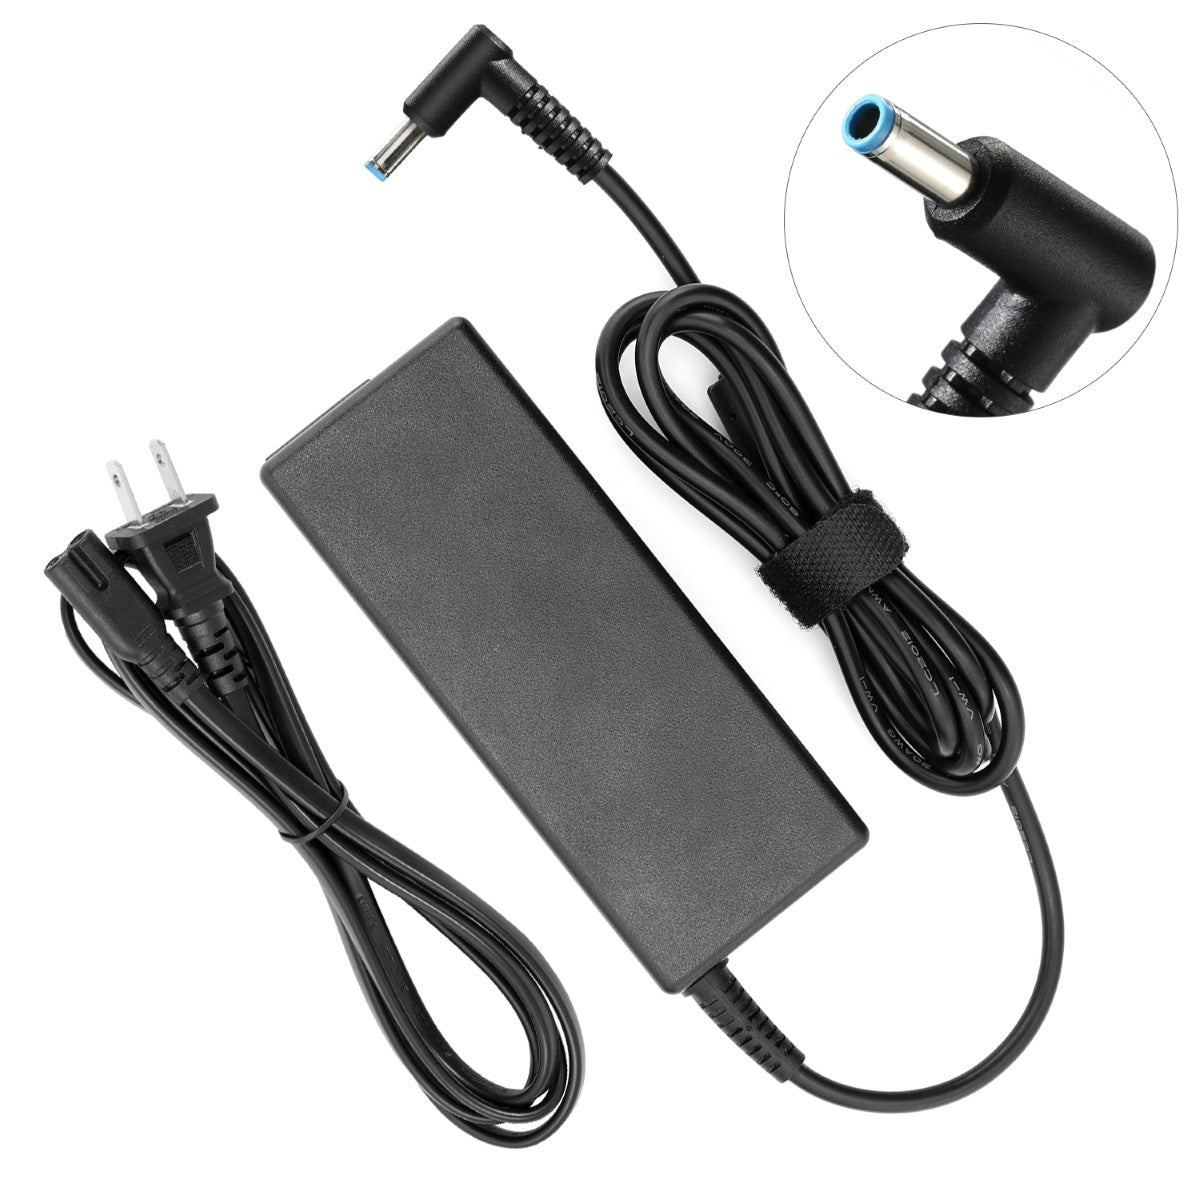 AC Adapter Charger for HP 15-f009wm Notebook (J2V78UA).